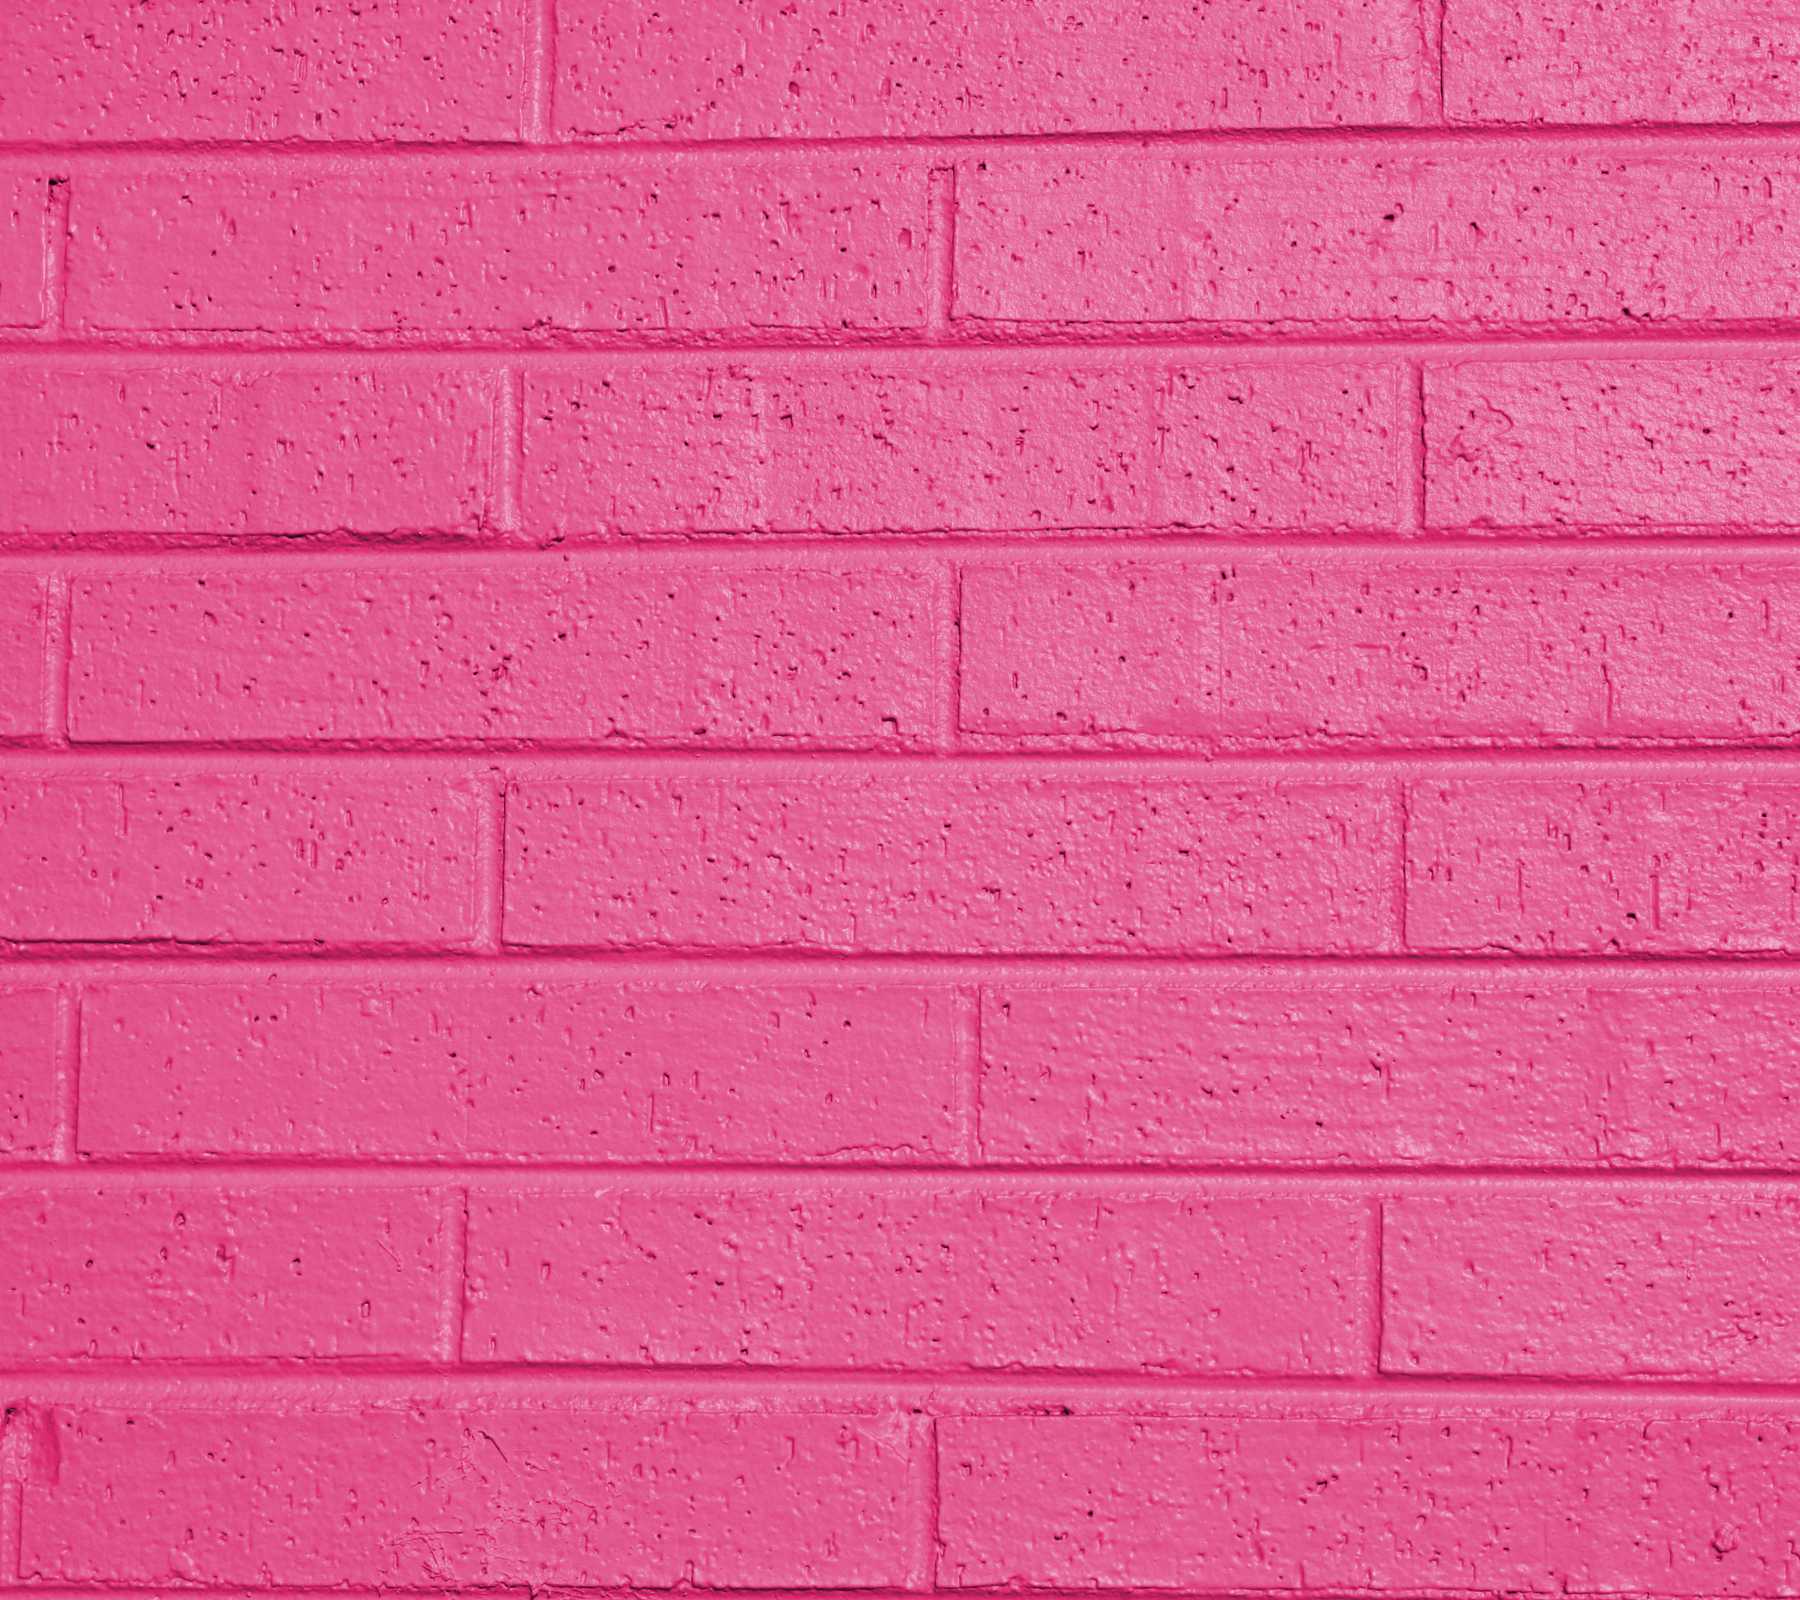 HD Collection: .LIRLIR Pink HD Wallpaper for PC & Mac, Tablet